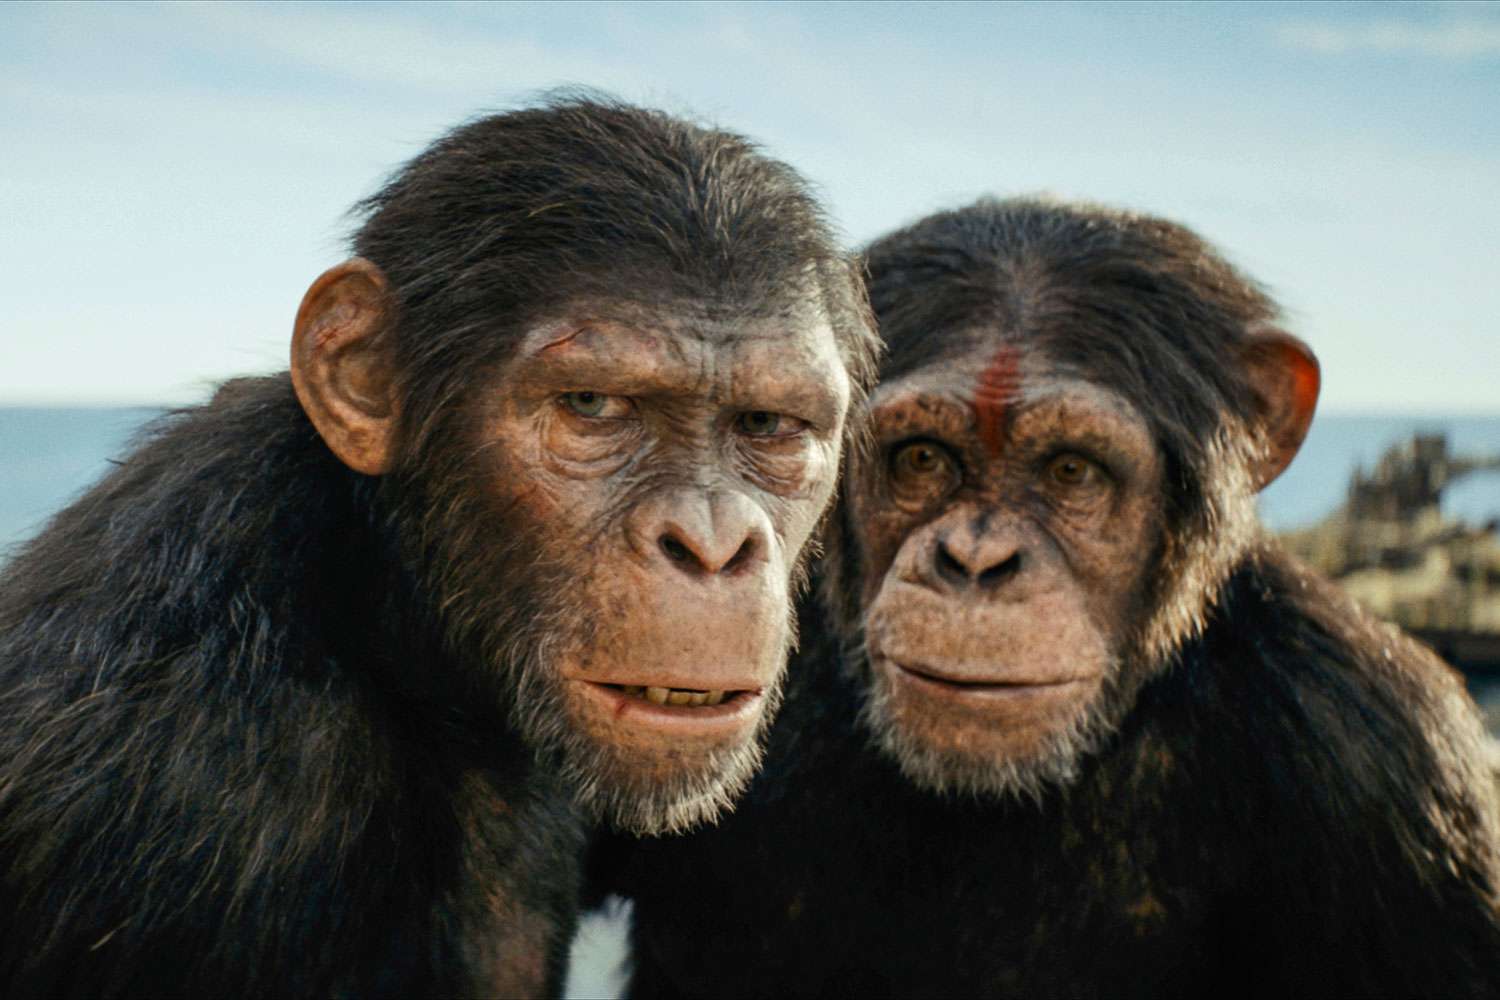 (L-R) Noa (played by Owen Teague) and Dar (played by Sara Wiseman) in 20th Century Studios' KINGDOM OF THE PLANET OF THE APES.